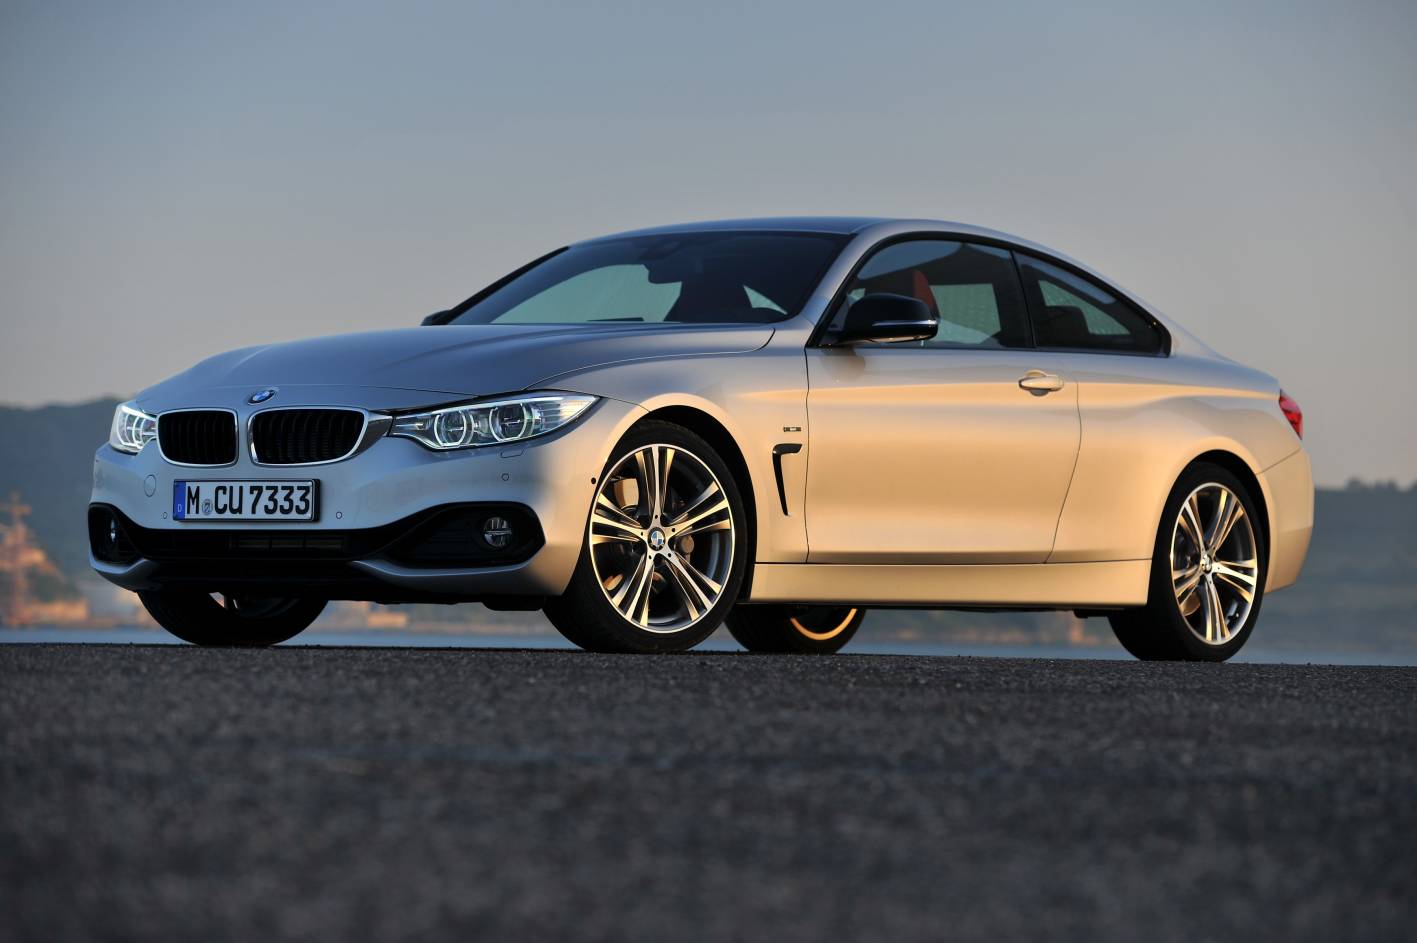 BMW 4 Series Coupe on sale in Australia in October